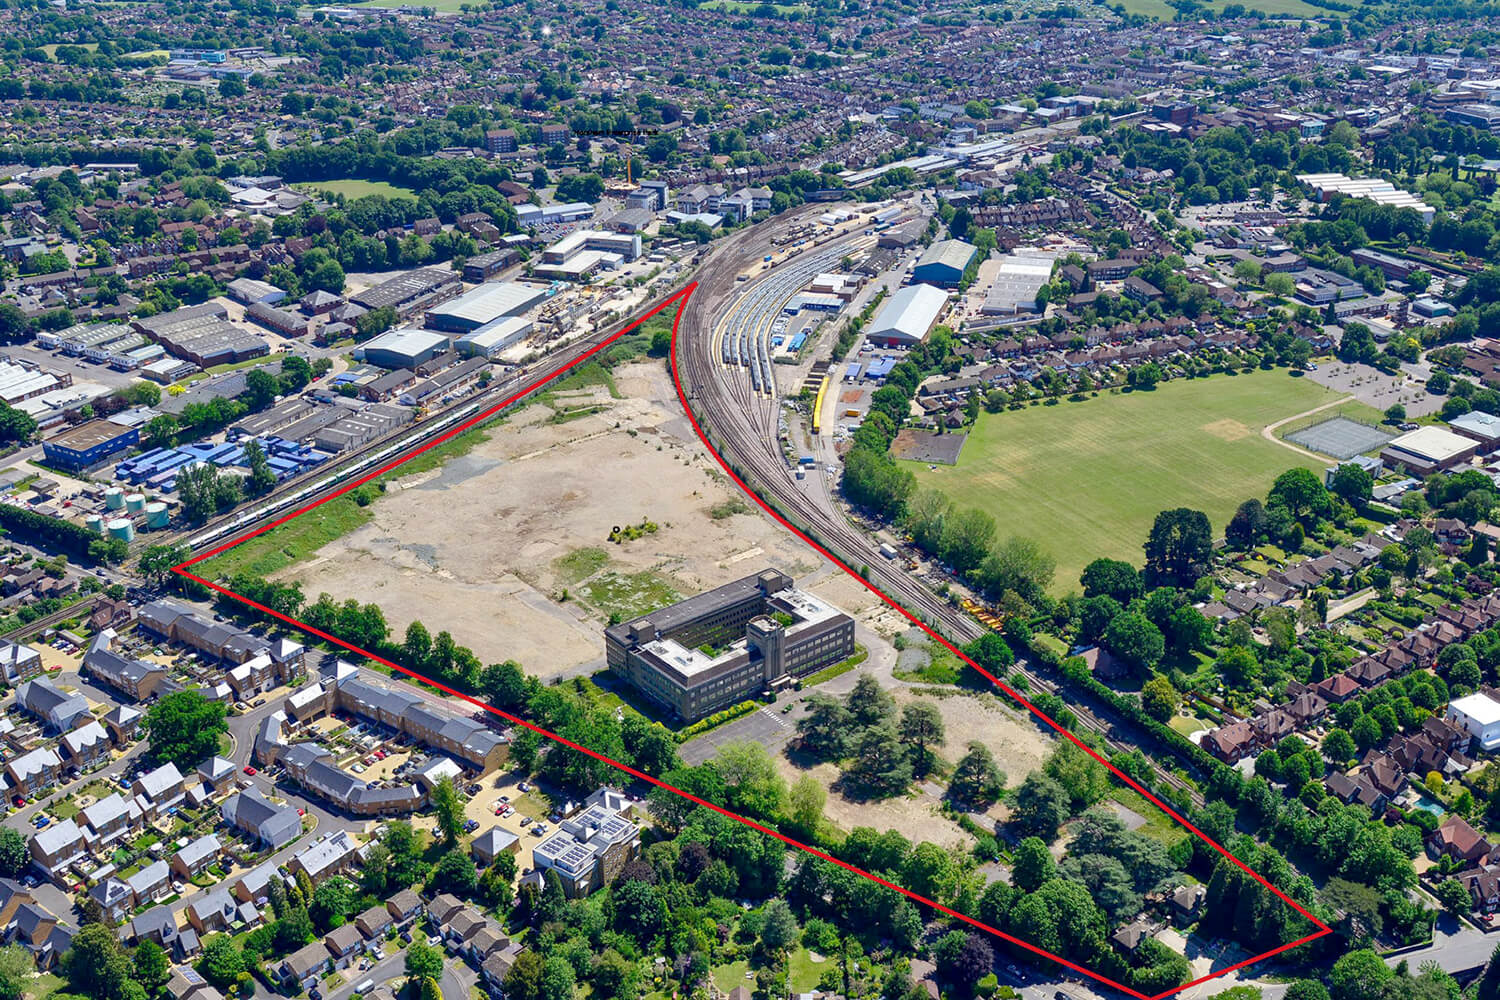 Aerial view of the site with a red line marking the site boundary